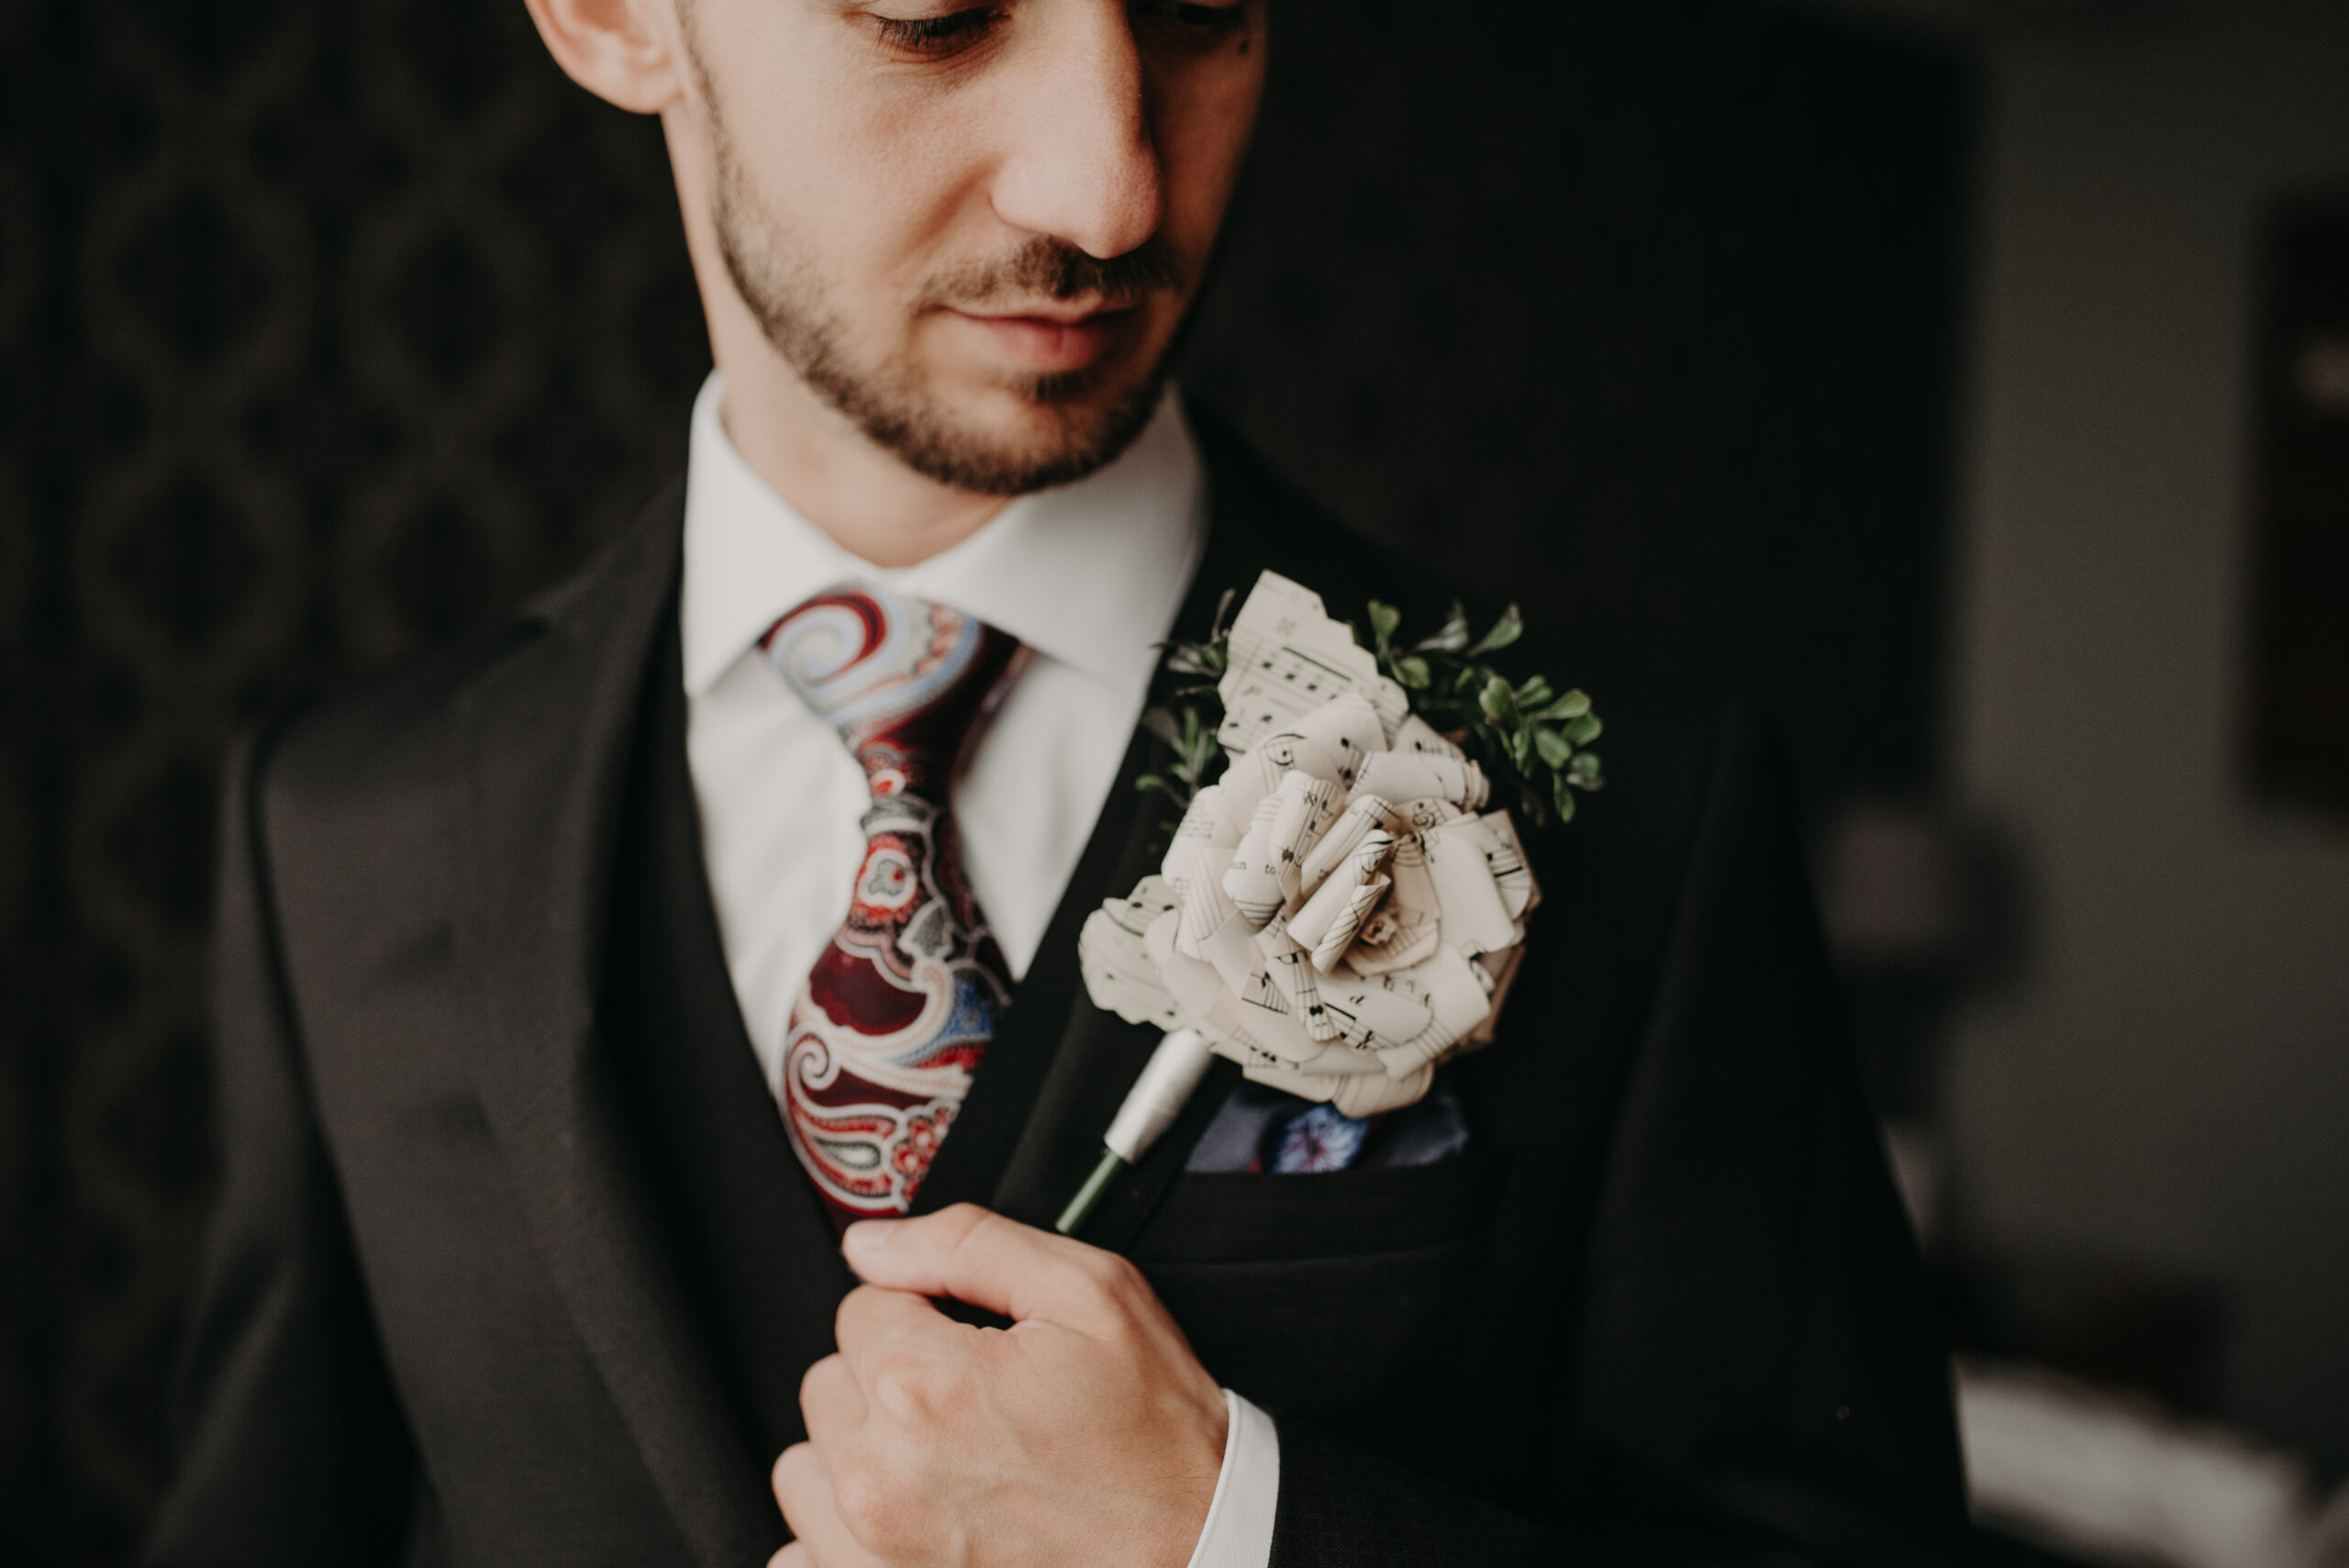 Tips for Choosing Wedding Attire for Grooms